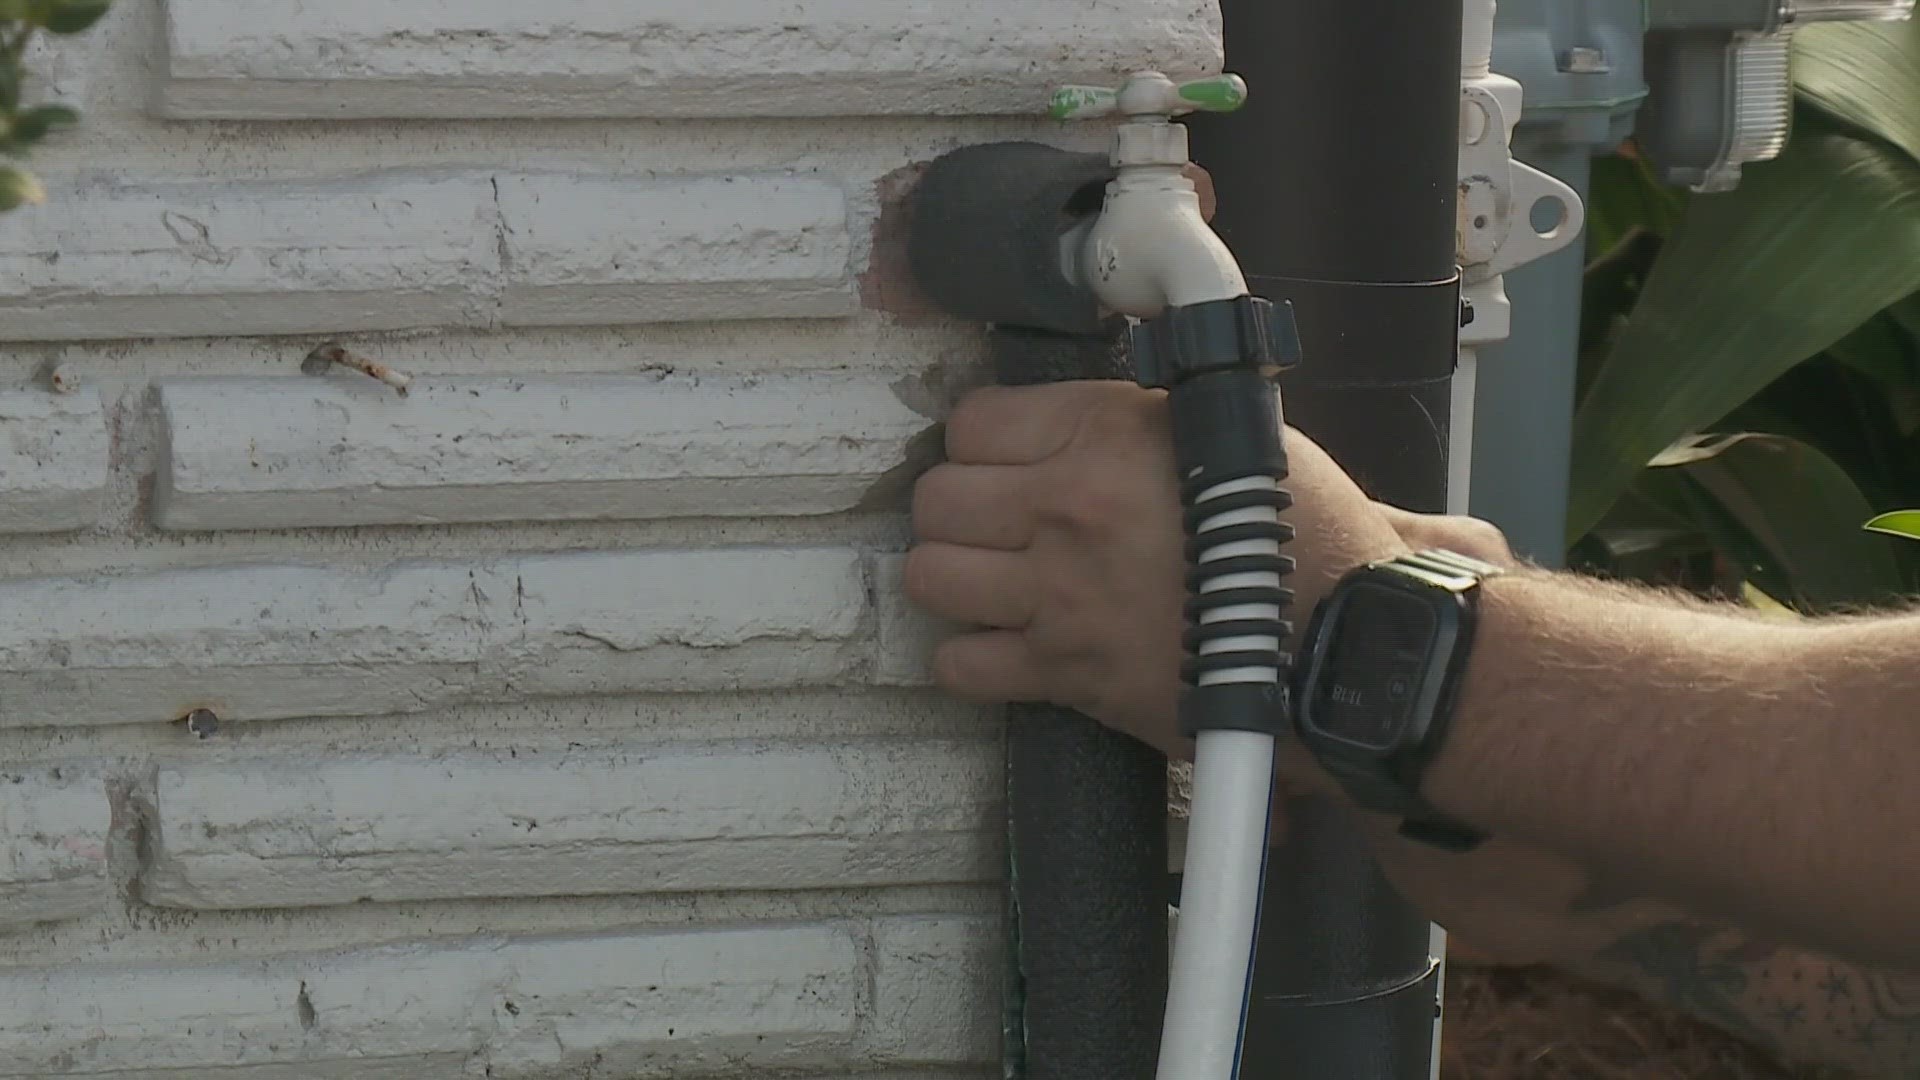 If you haven't already insulated your pipes, it's not too late.